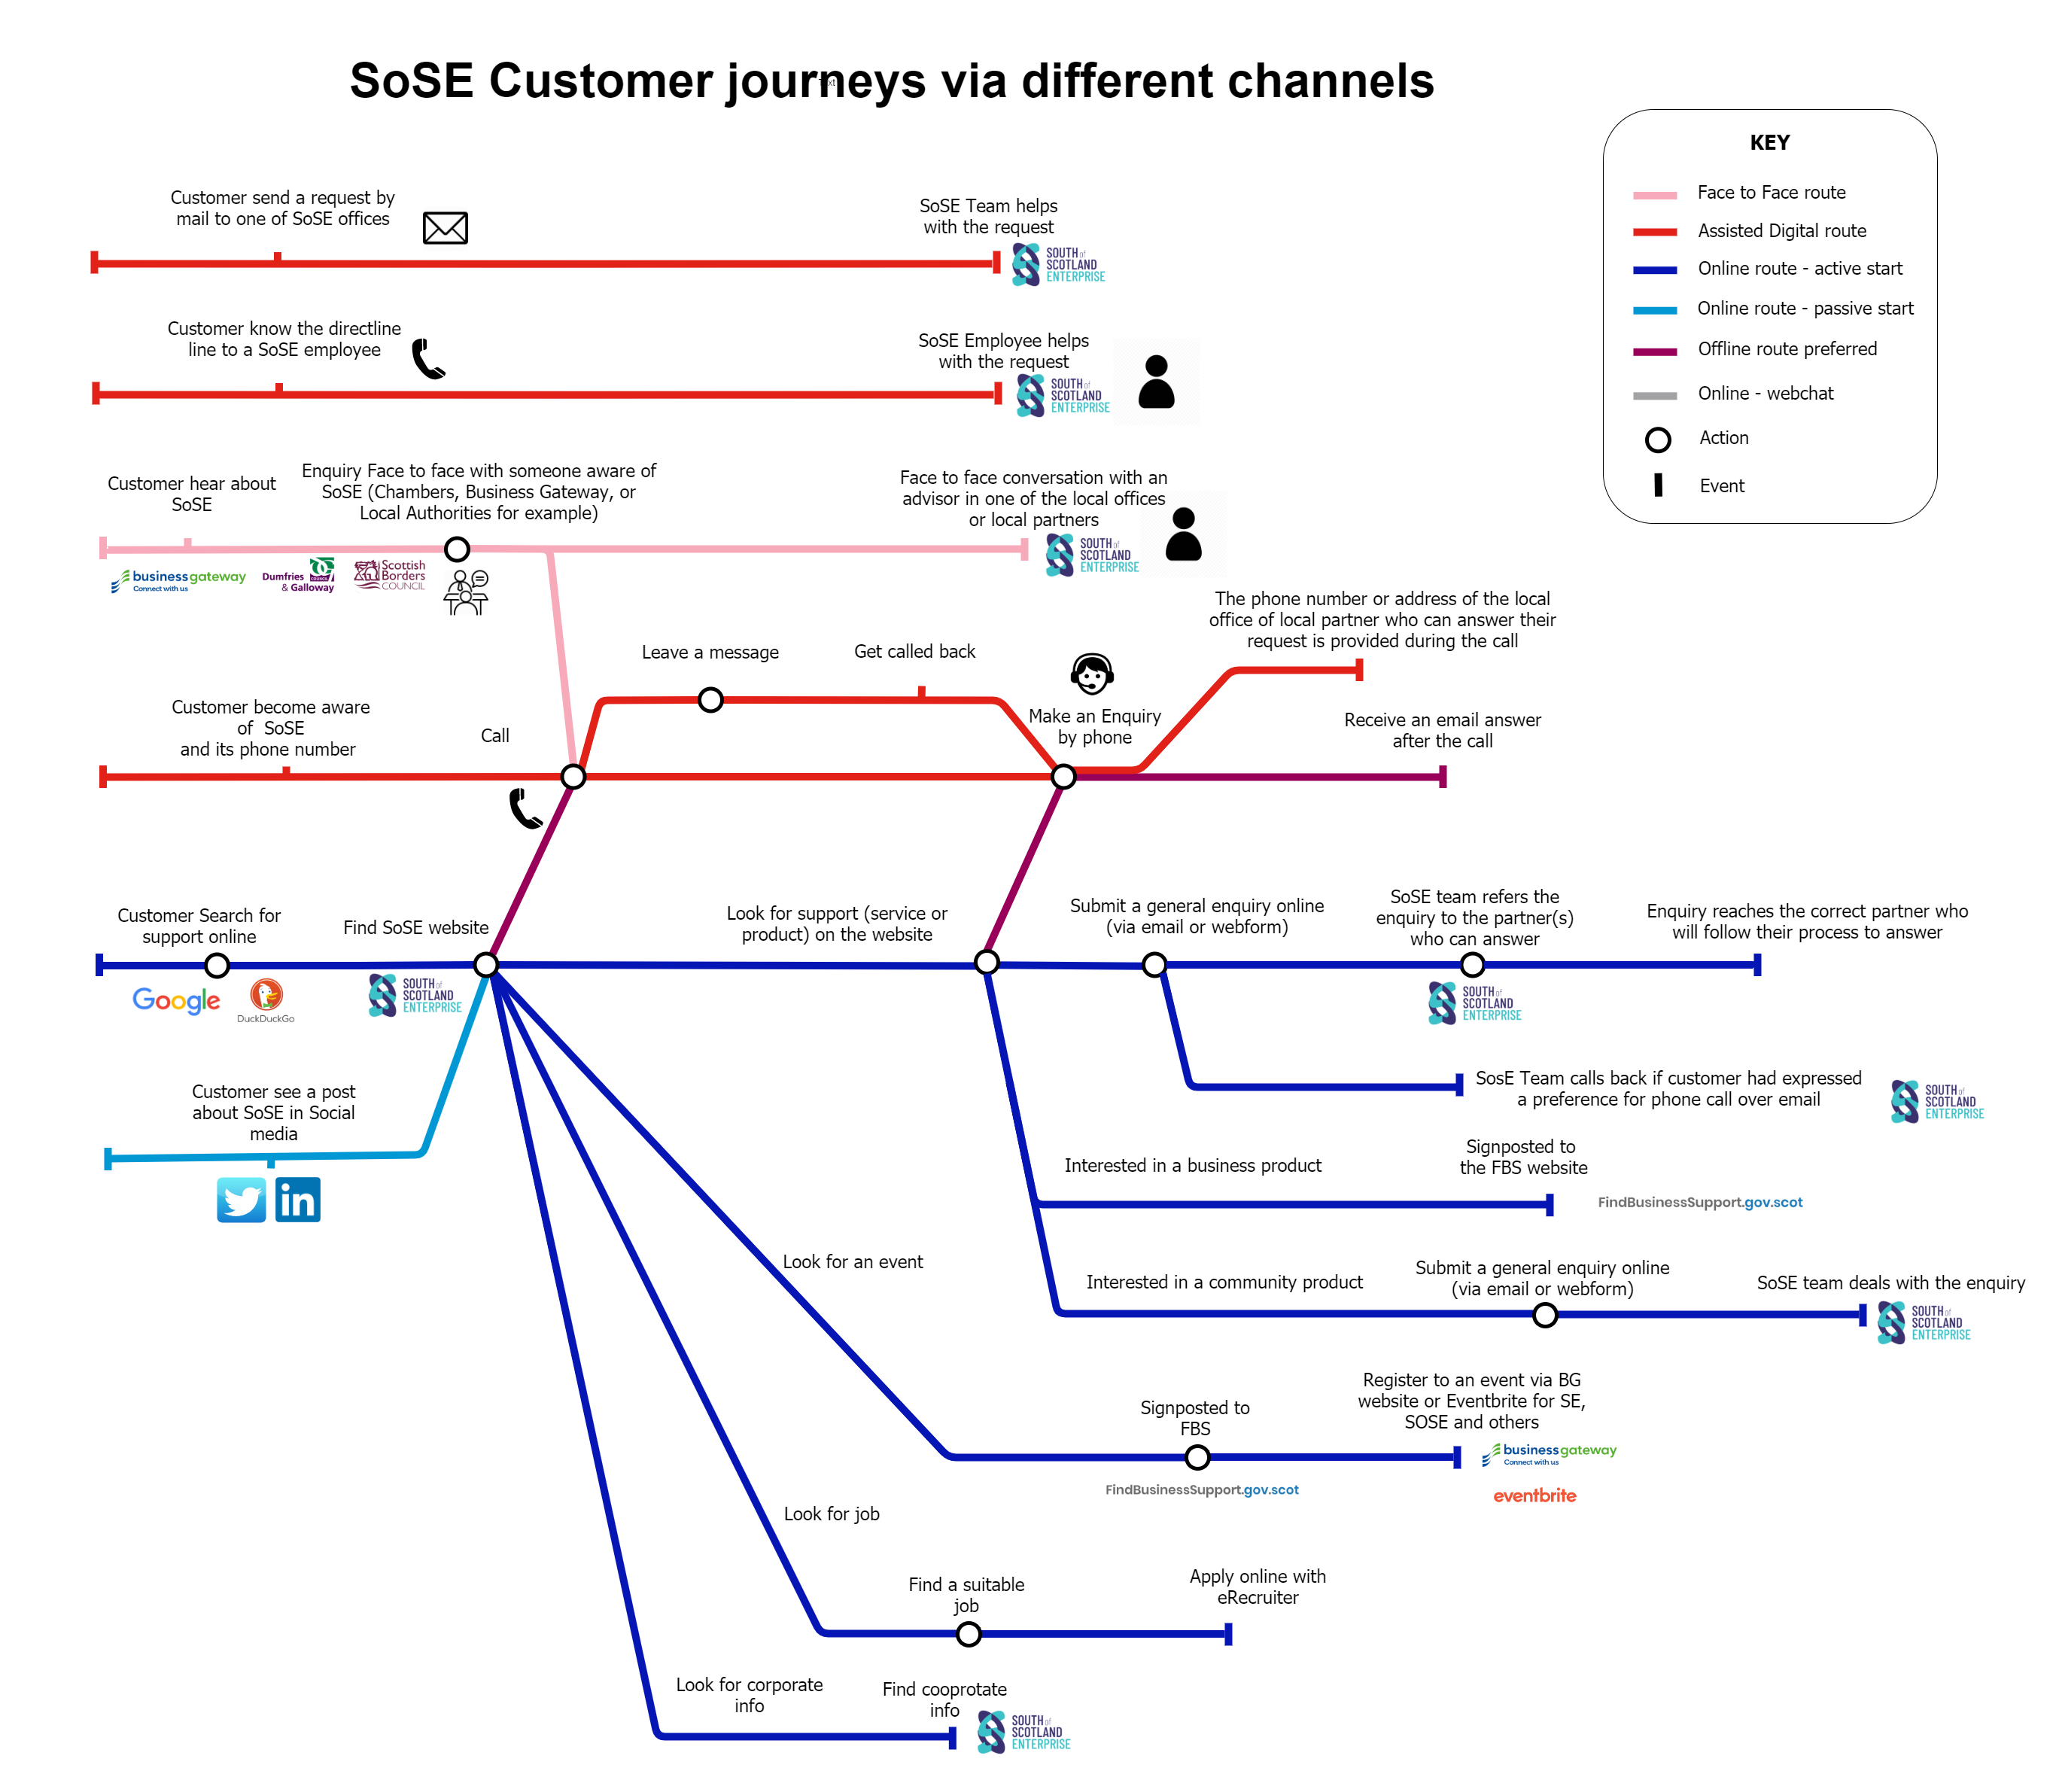 customer journey via different channel as a tube map